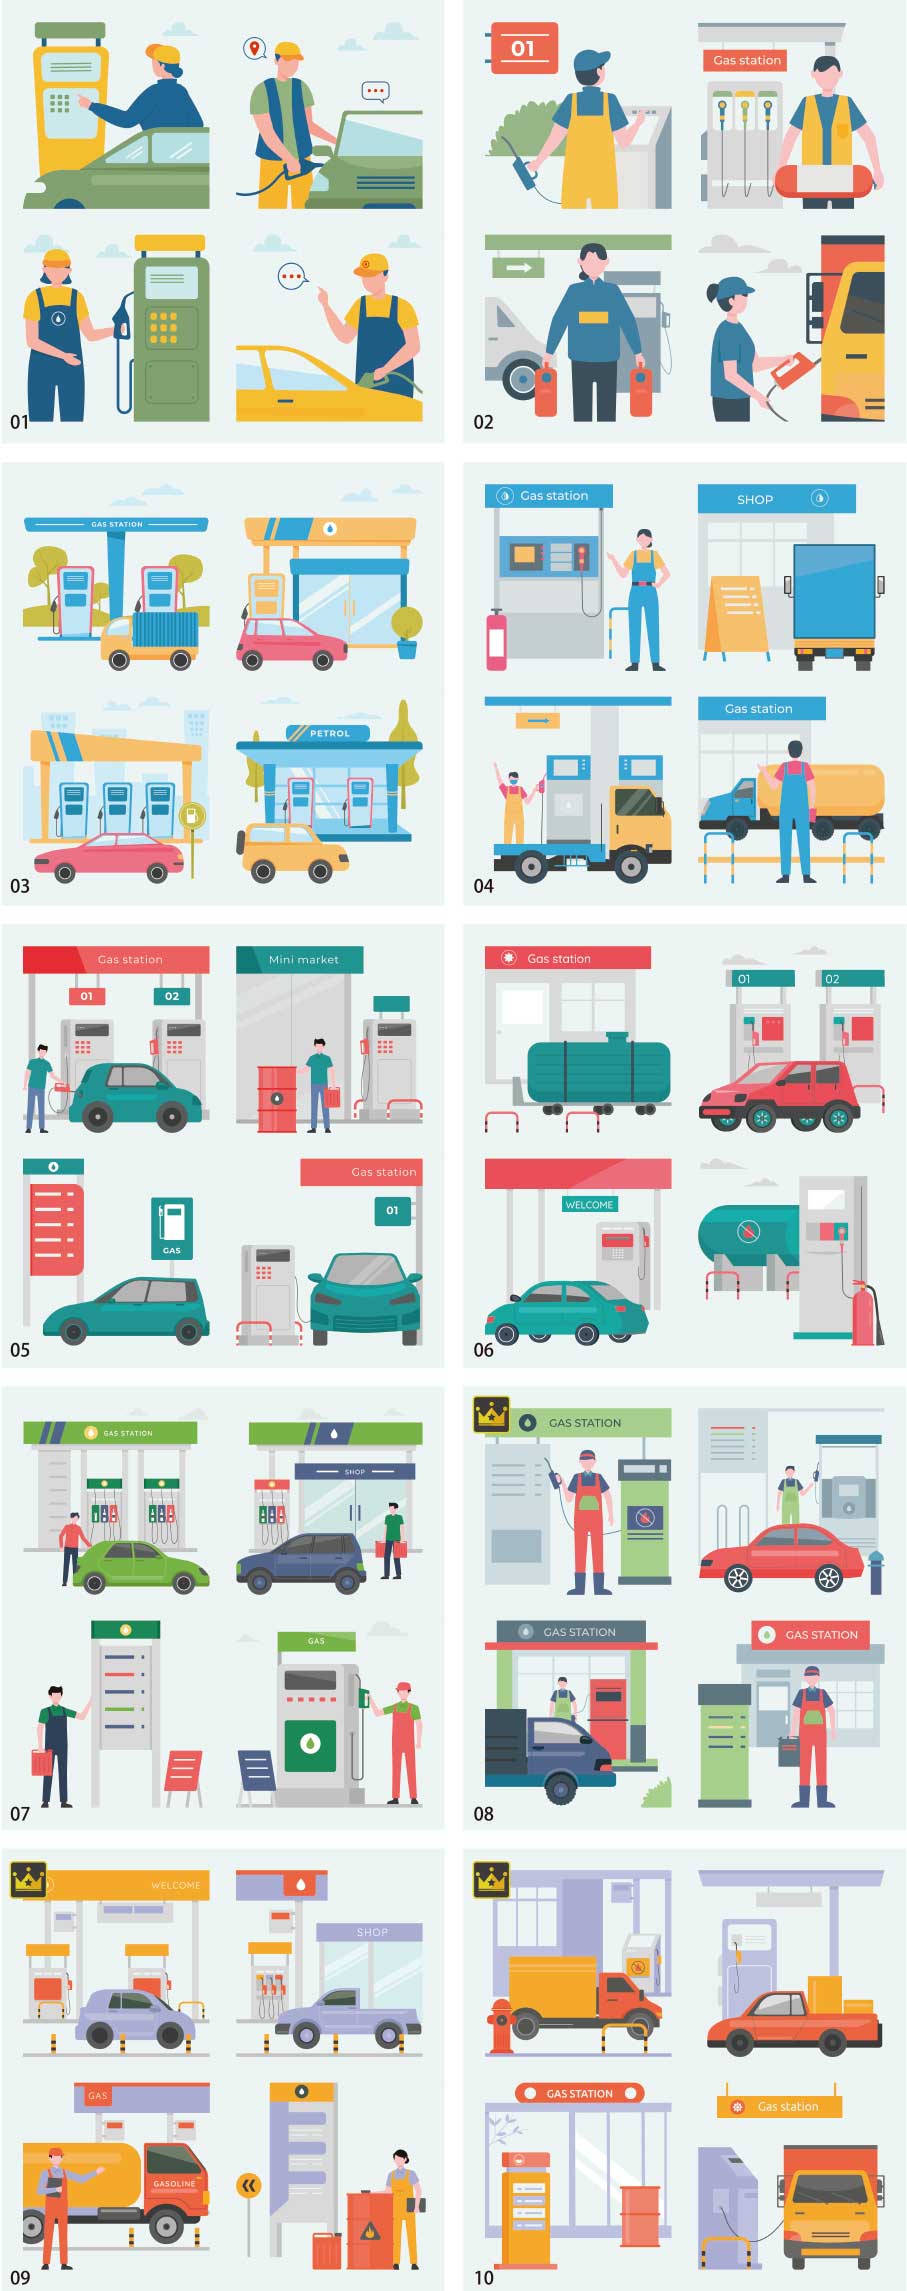 Gas station illustration collection